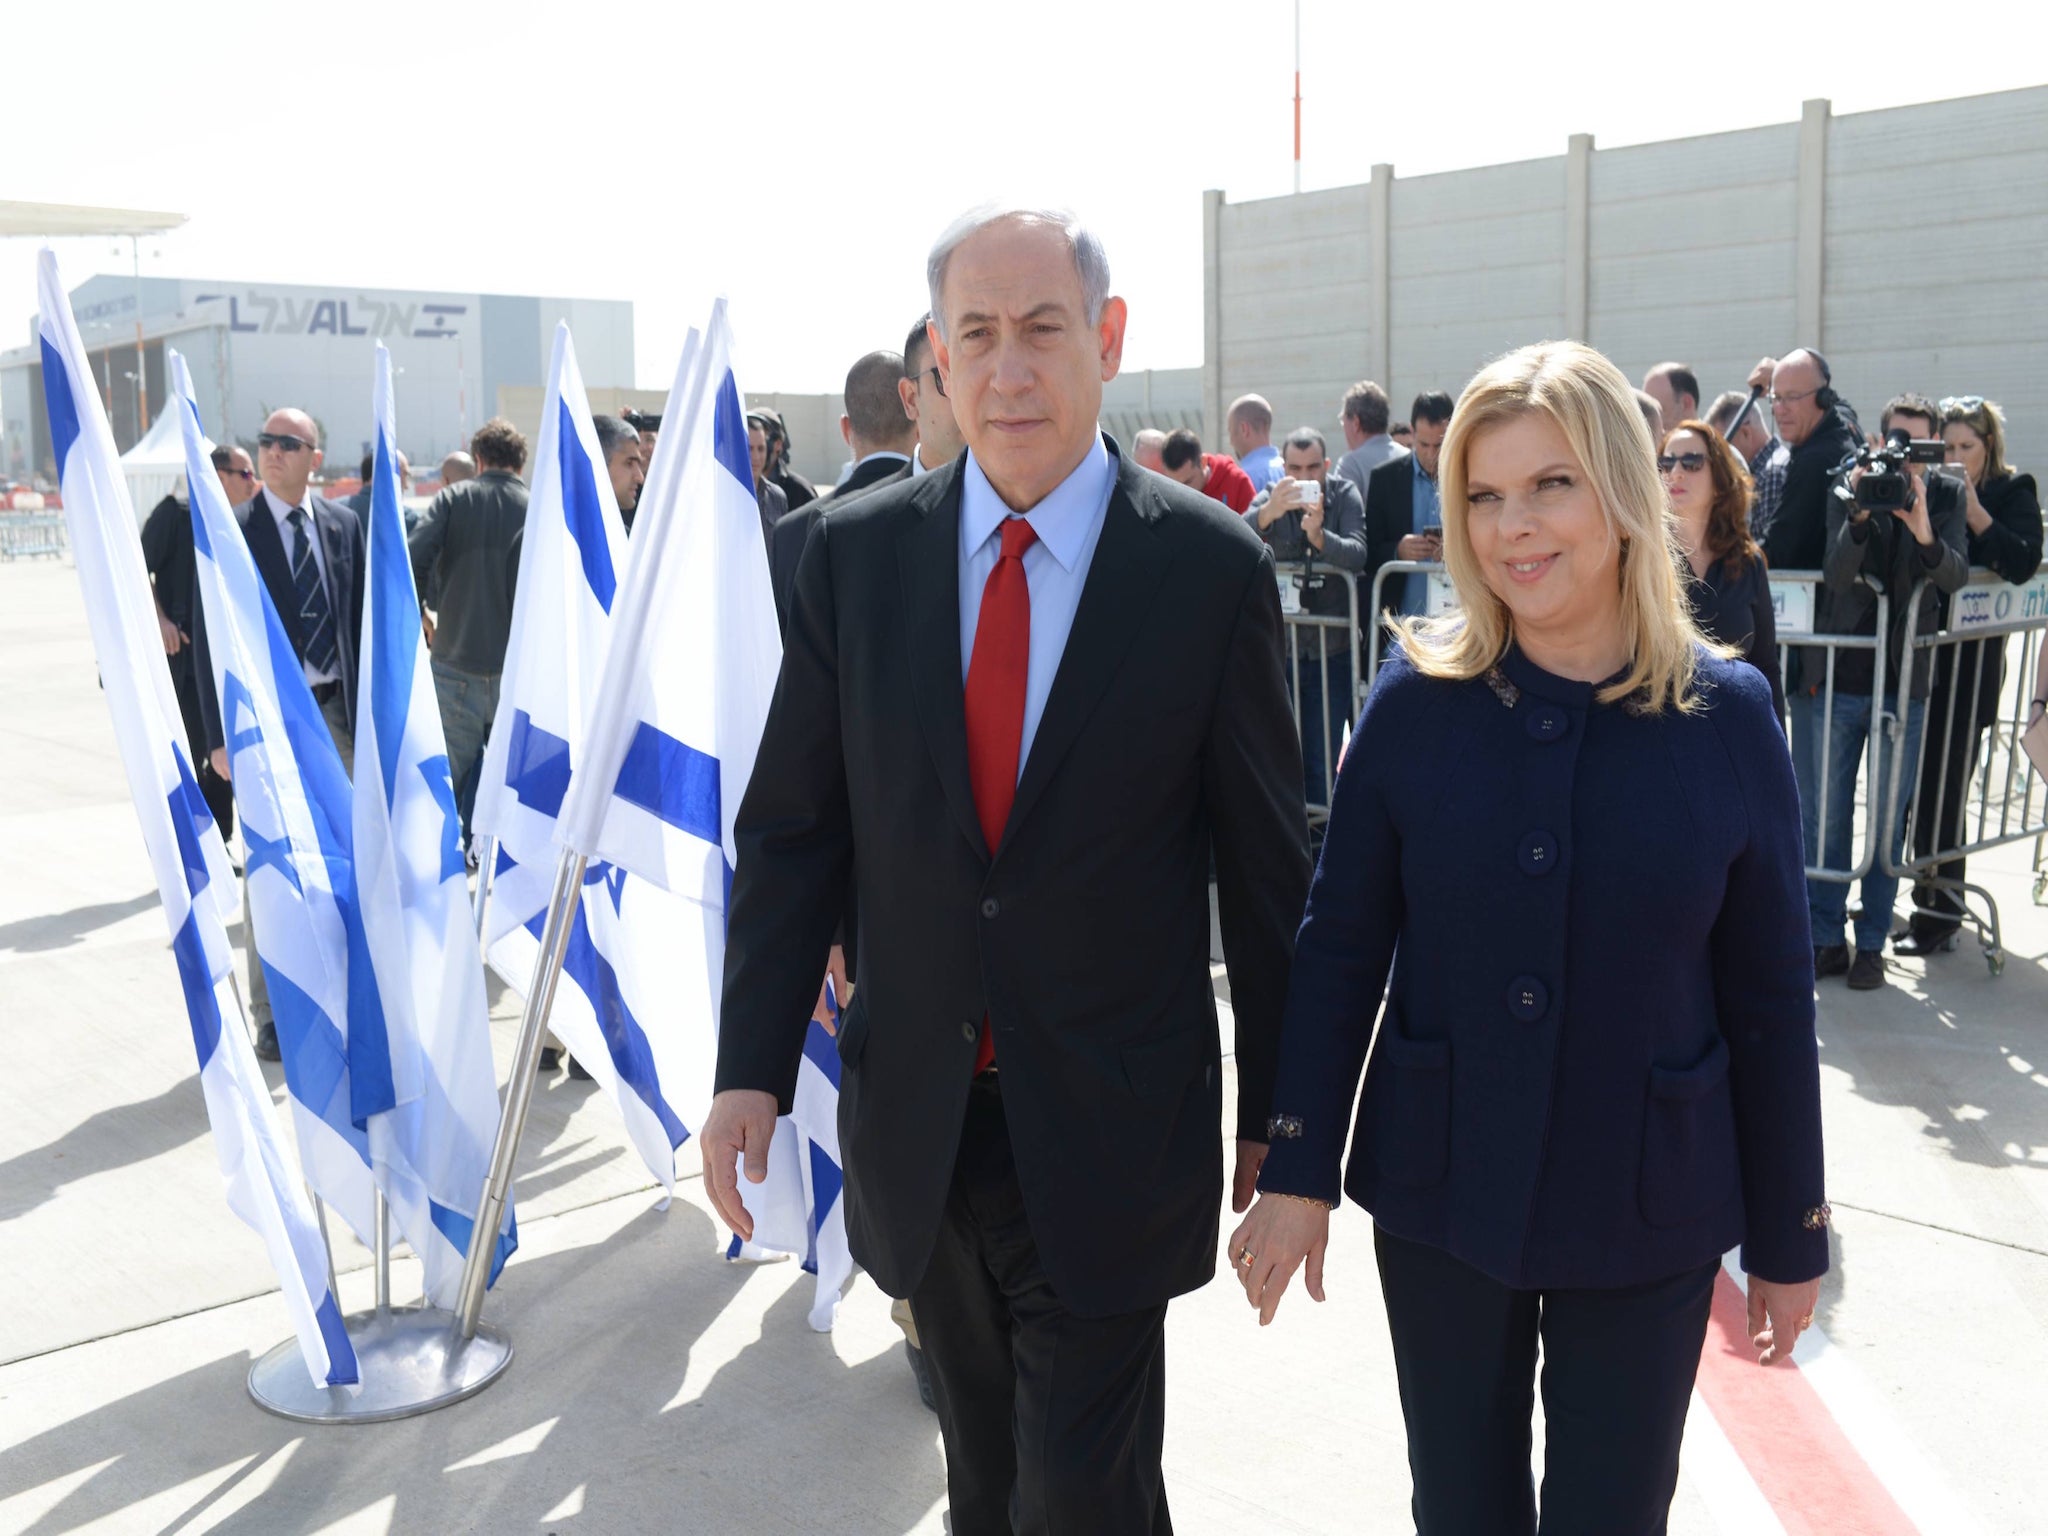 Benjamin Netanyahu and his wife Sarah left Israel for a 48-hour trip to the US